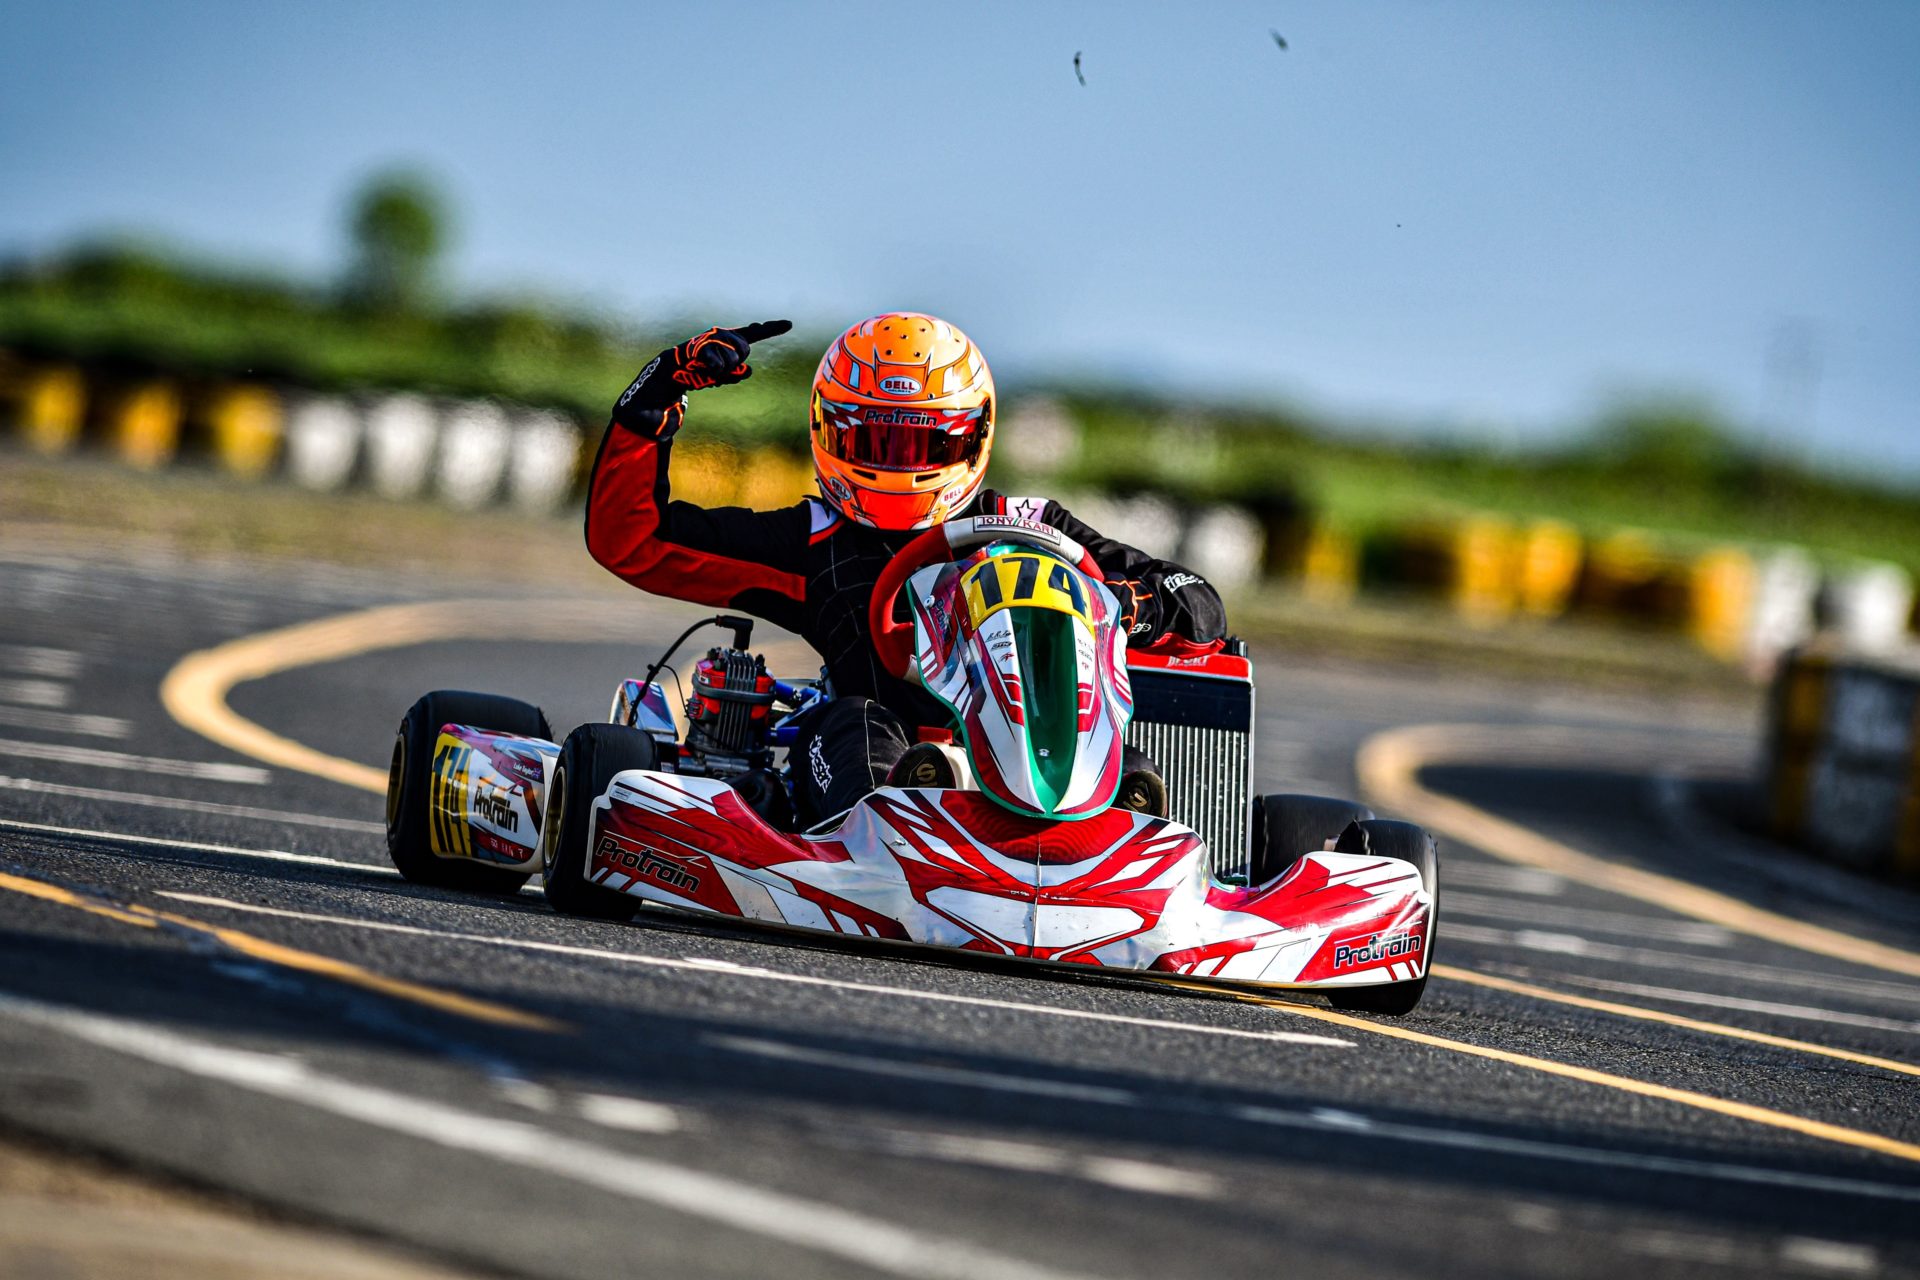 KARTING: Luke races to championship title - The King's School Chester